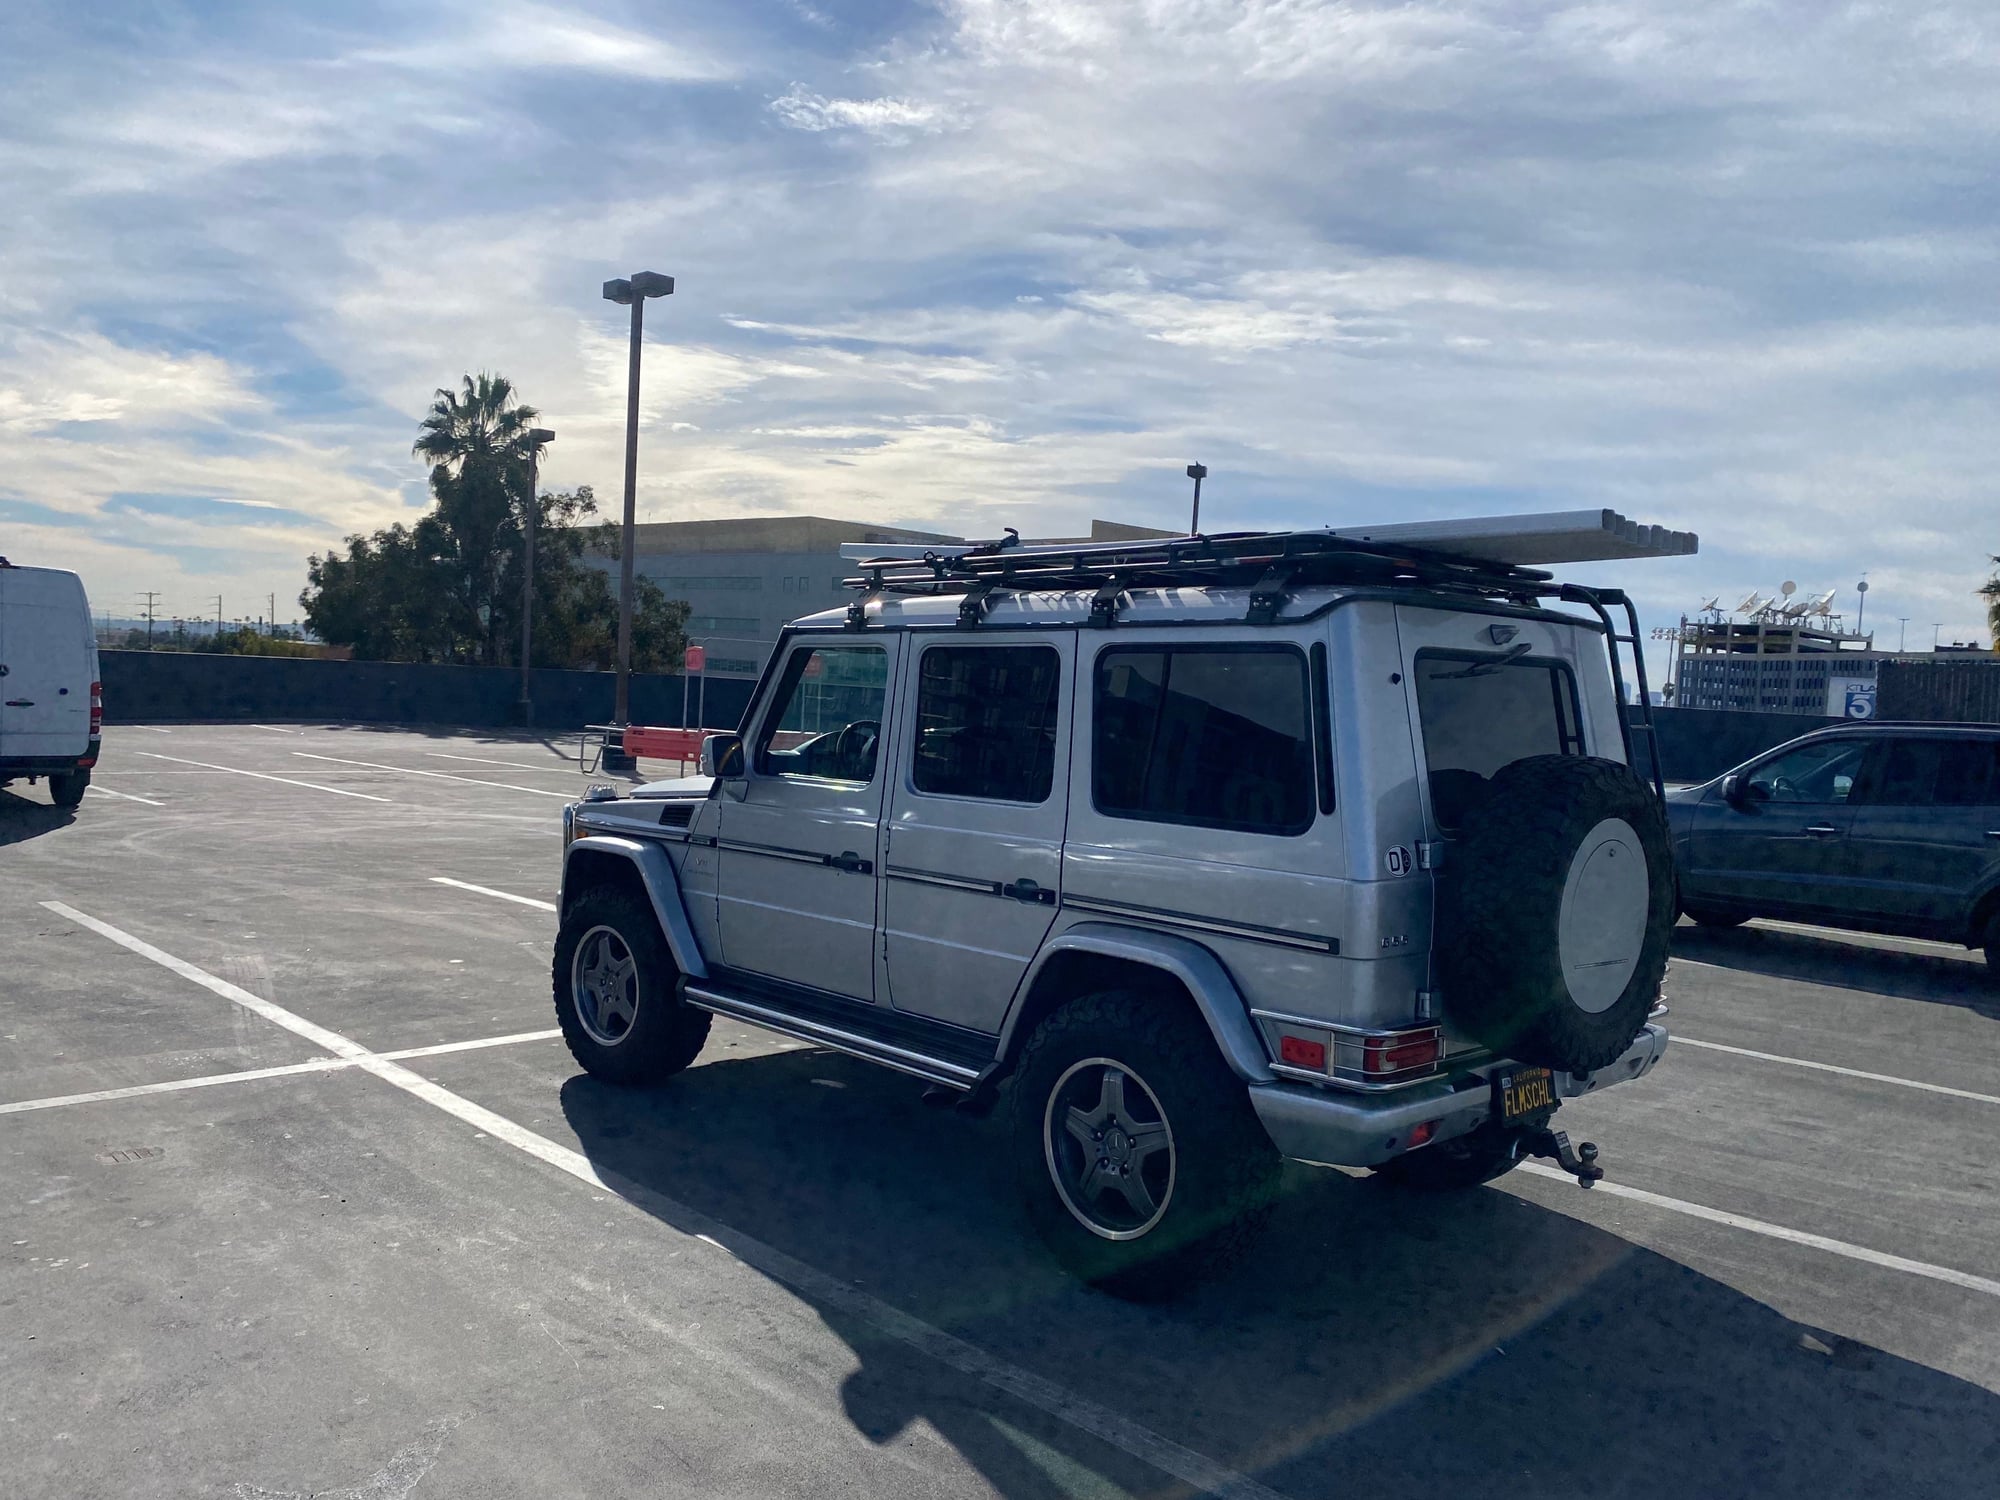 2008 Mercedes-Benz G55 AMG - WTT : 2008 G55 AMG for 2016-2017 AMG GTS - Used - VIN WB105730XS6229837 - 93,000 Miles - 8 cyl - AWD - Automatic - SUV - Silver - Los Angeles, CA 90026, United States